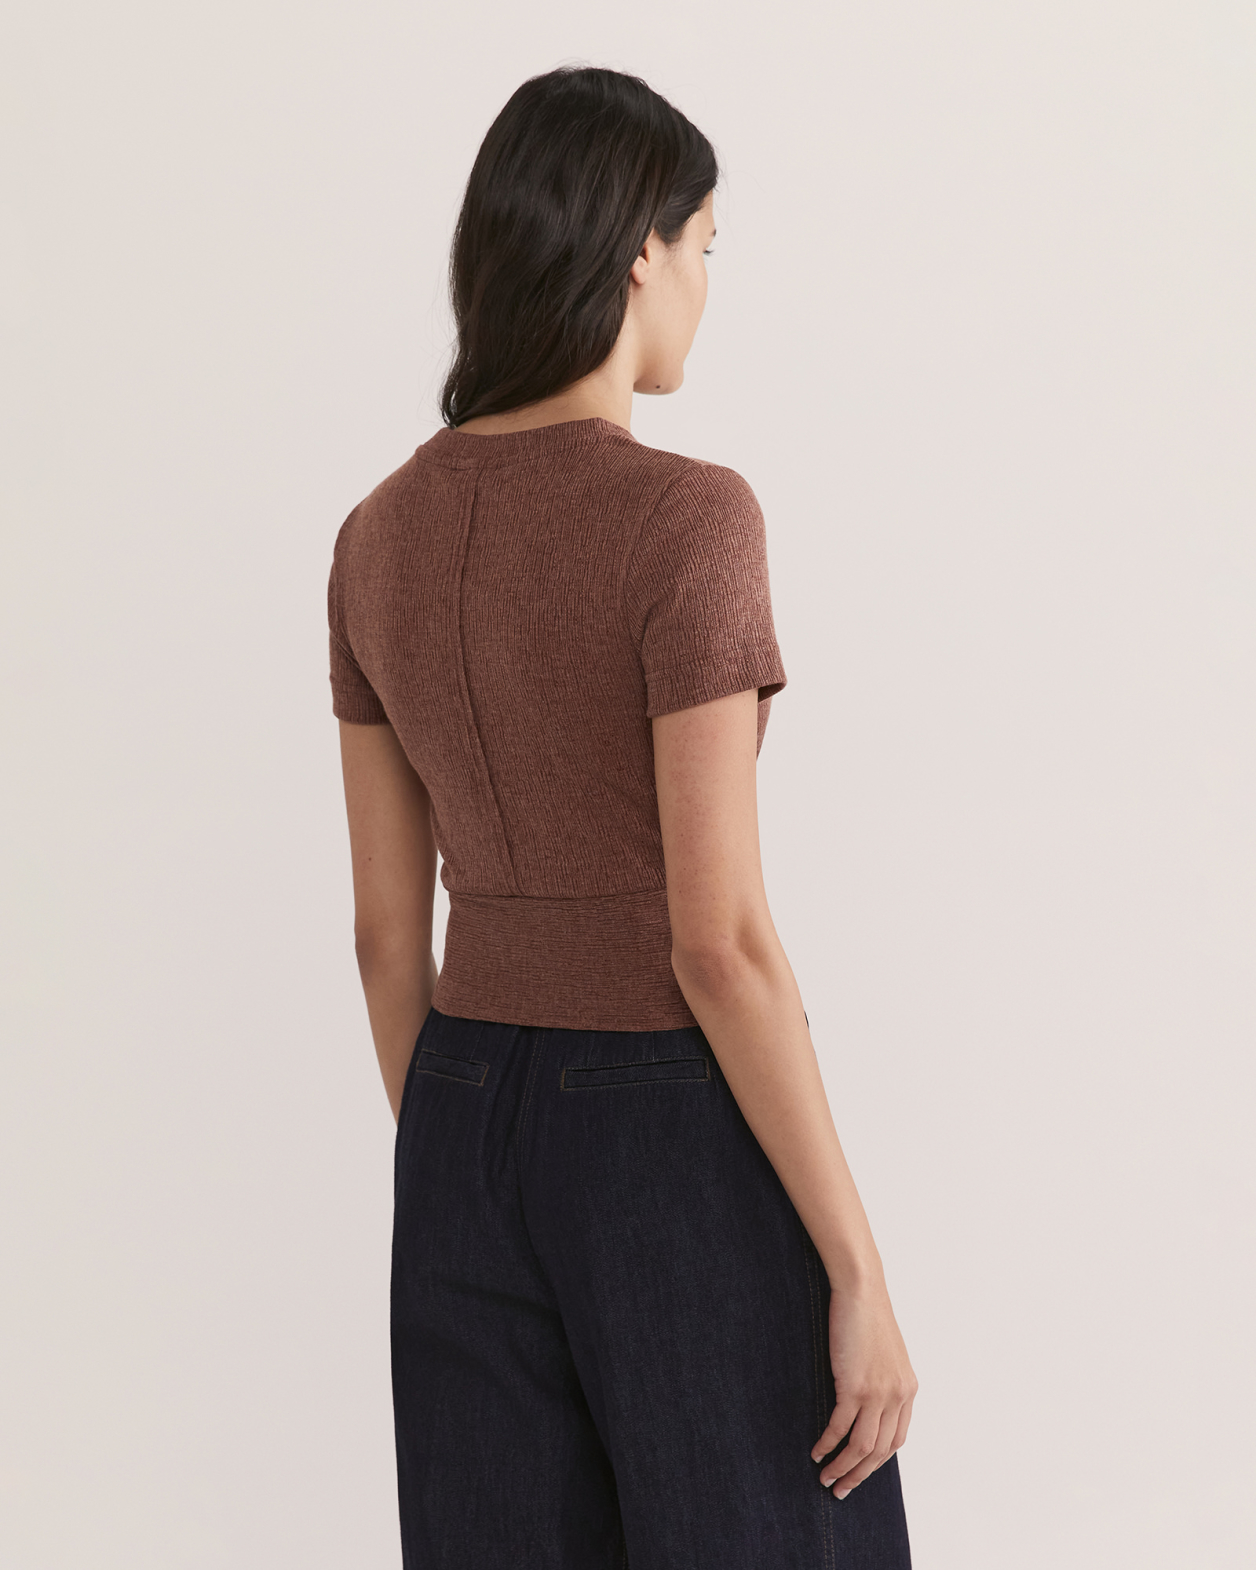 Xanthe Twist Front Top in MAHOGANY